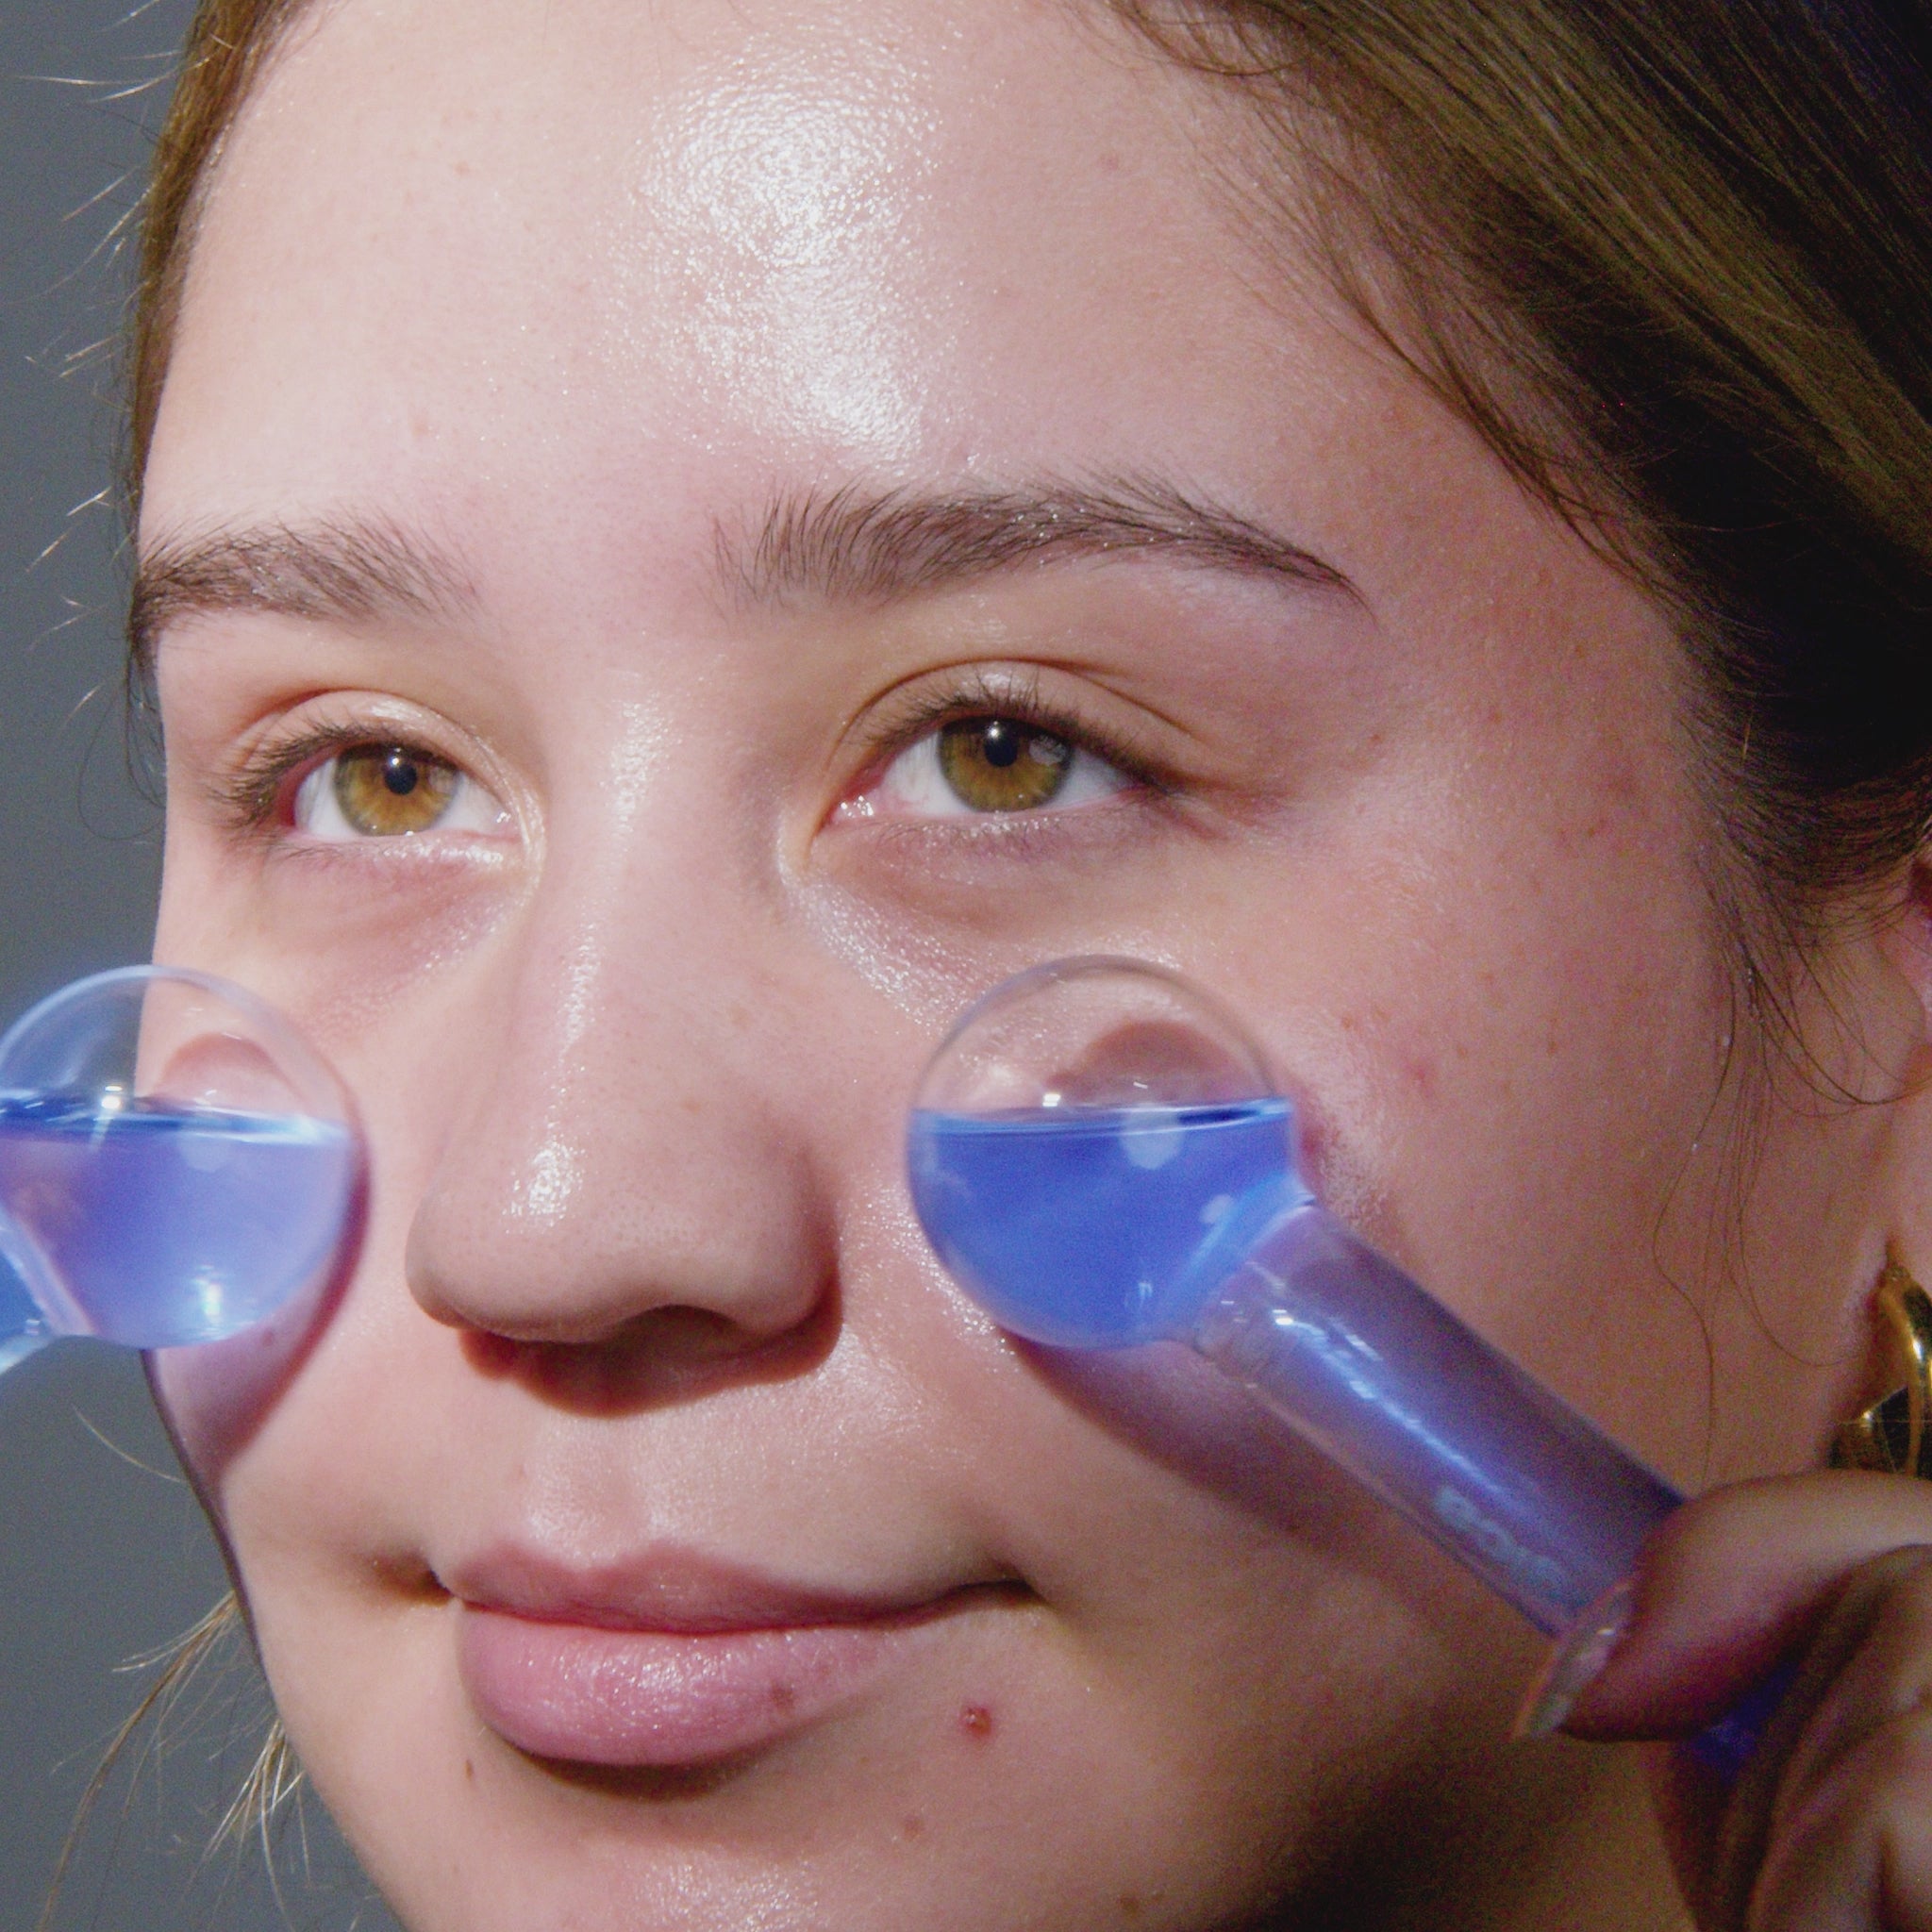 model using ice globes on face